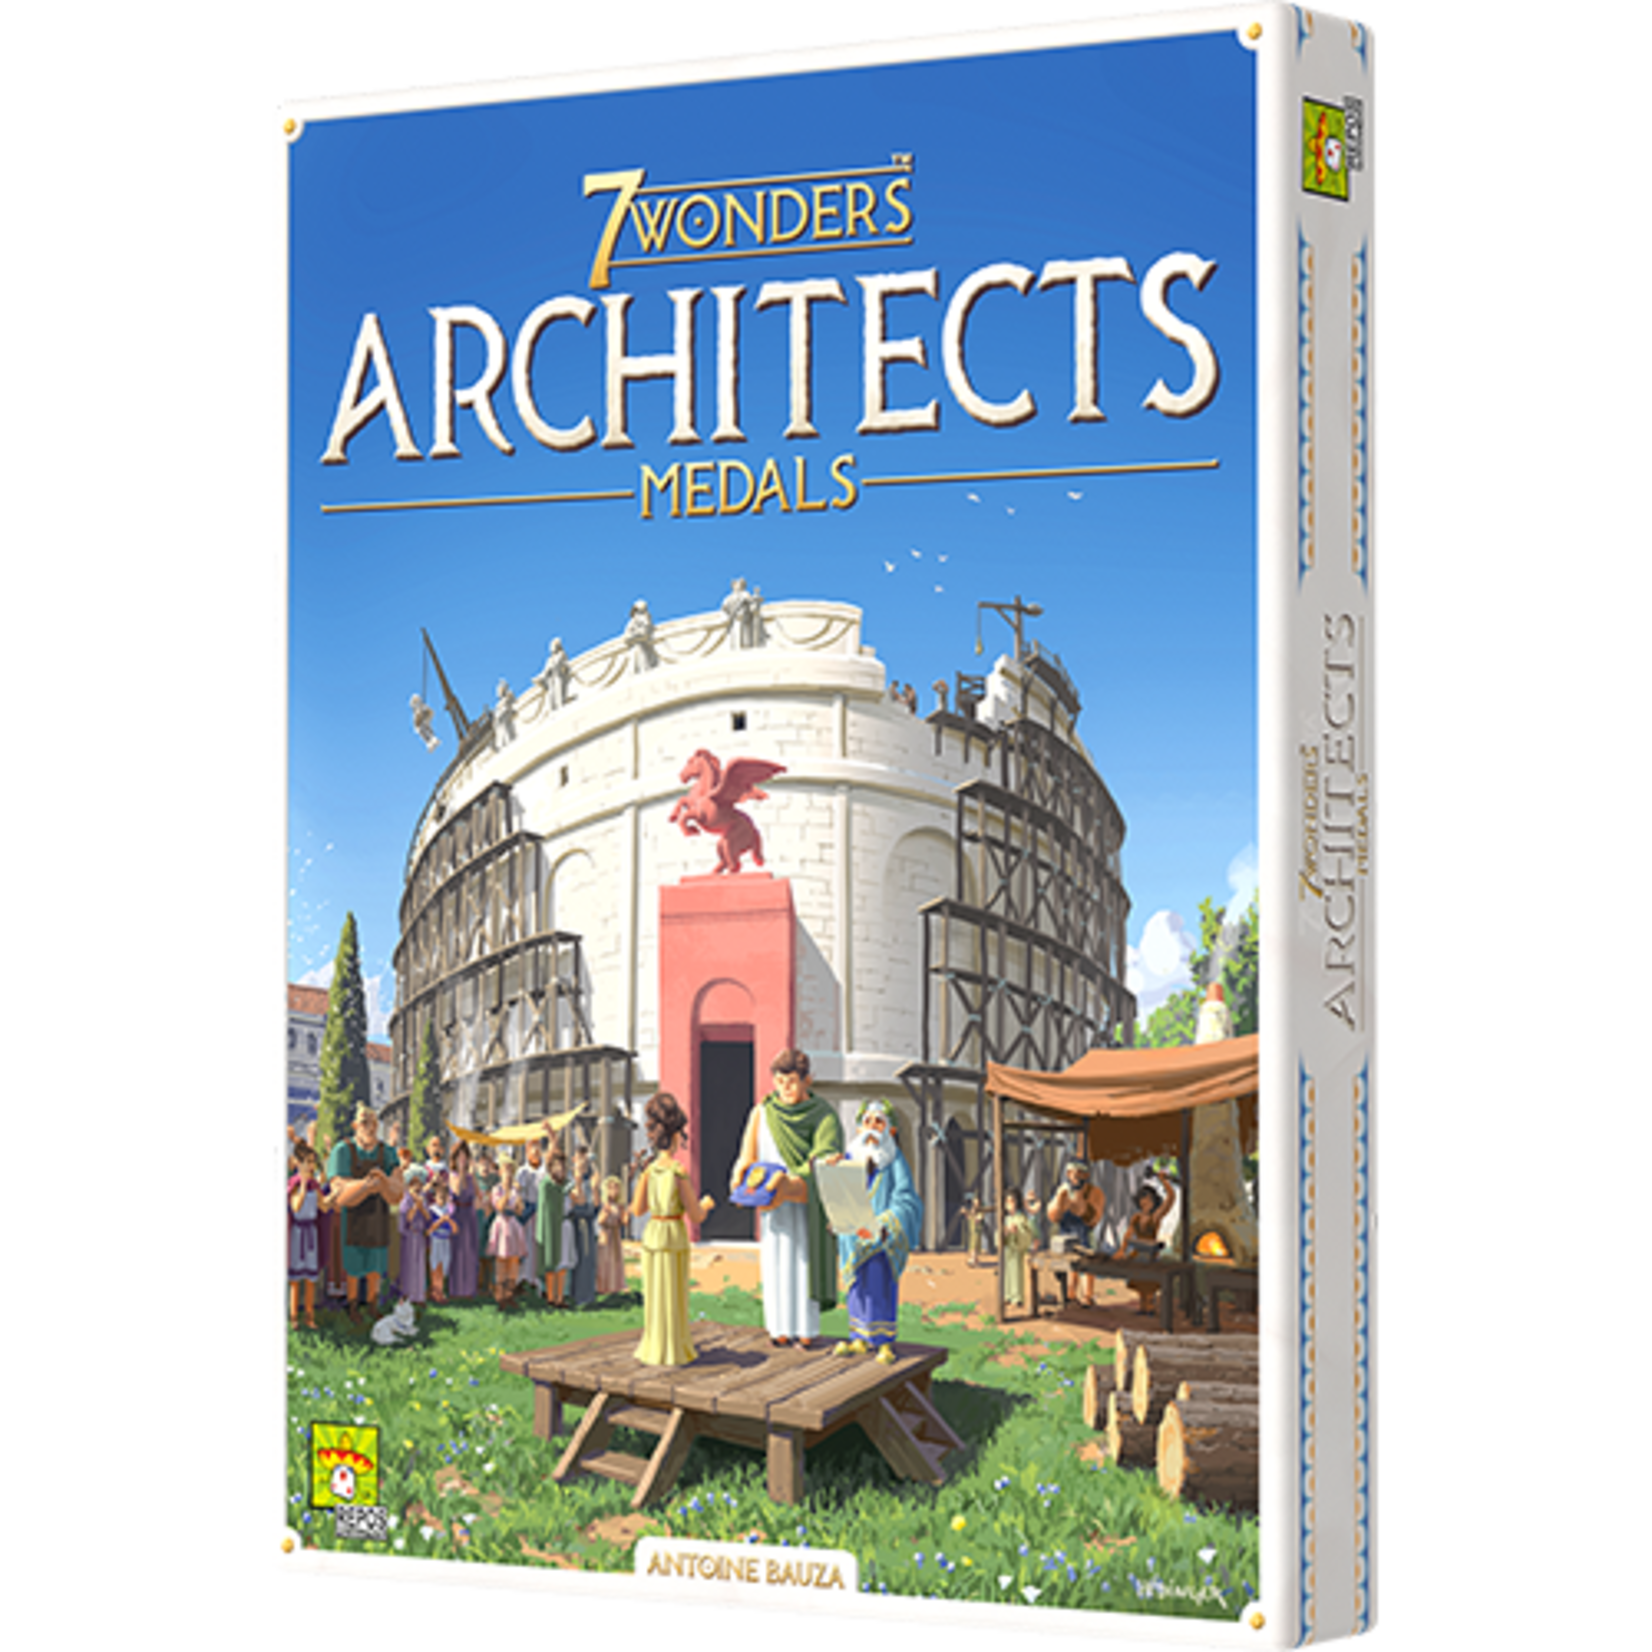 Repos Production 7 Wonders Architects Medals